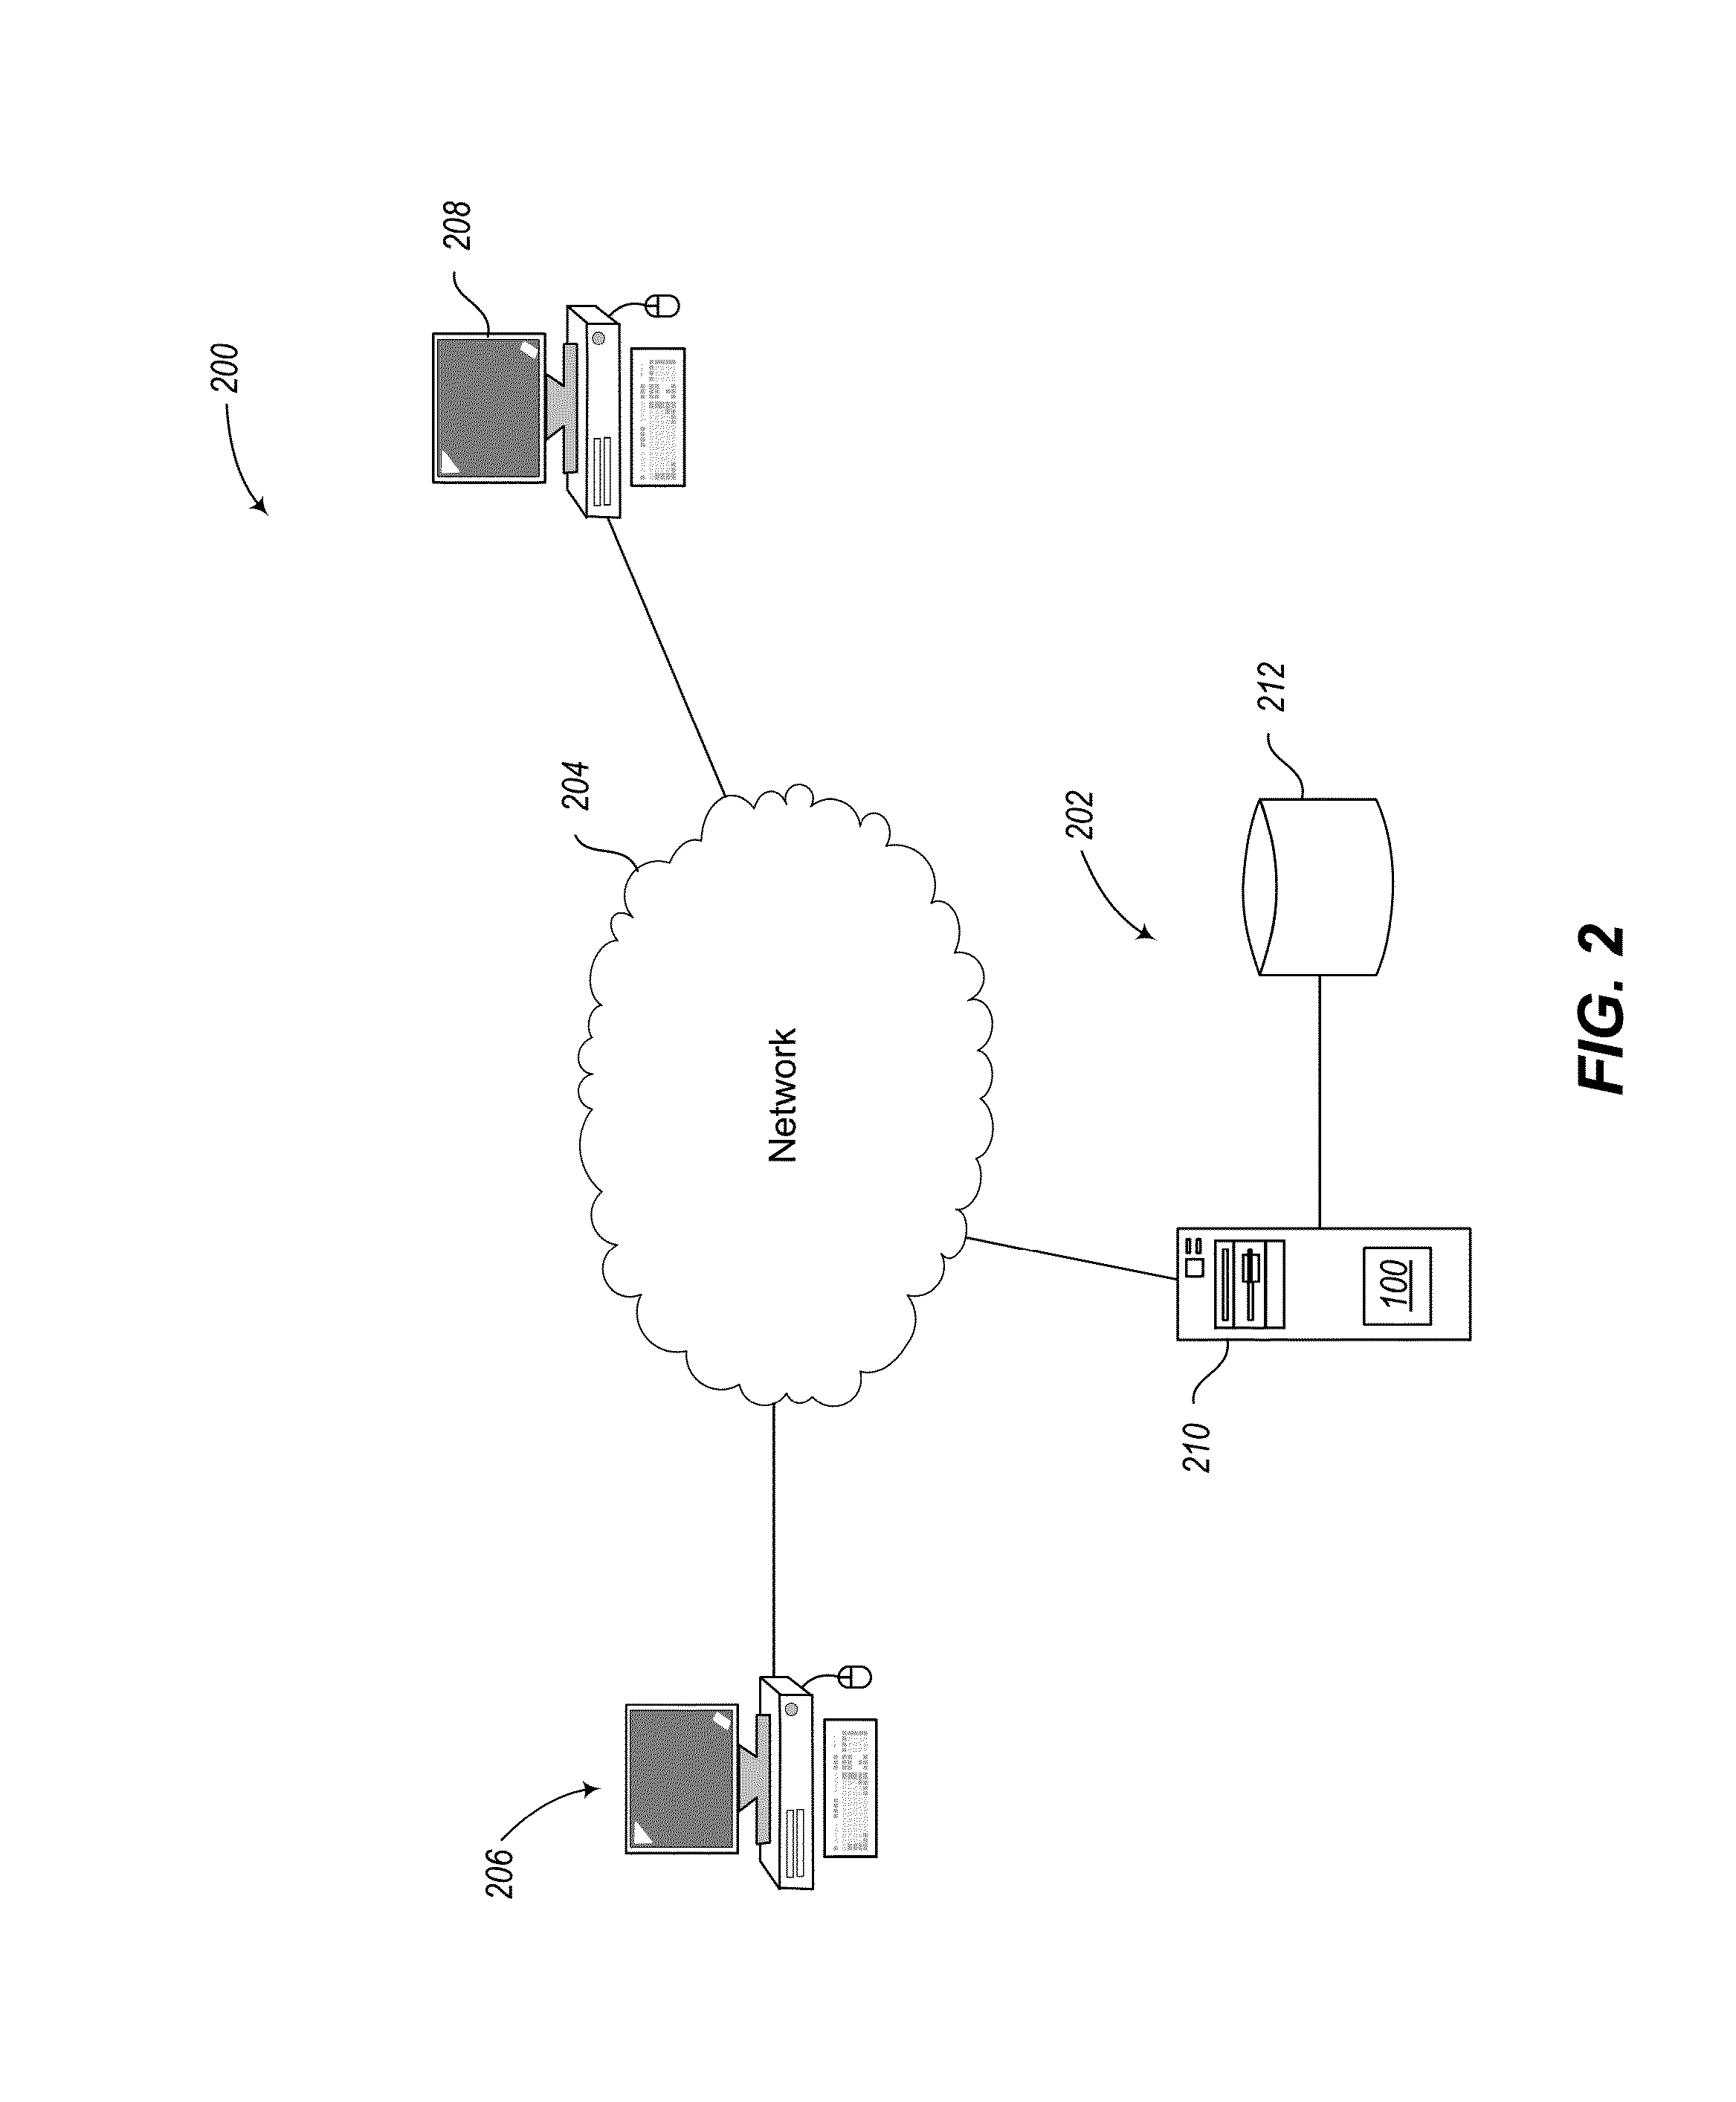 Method and system of assessing risk associated with users based at least in part on online presence of the user